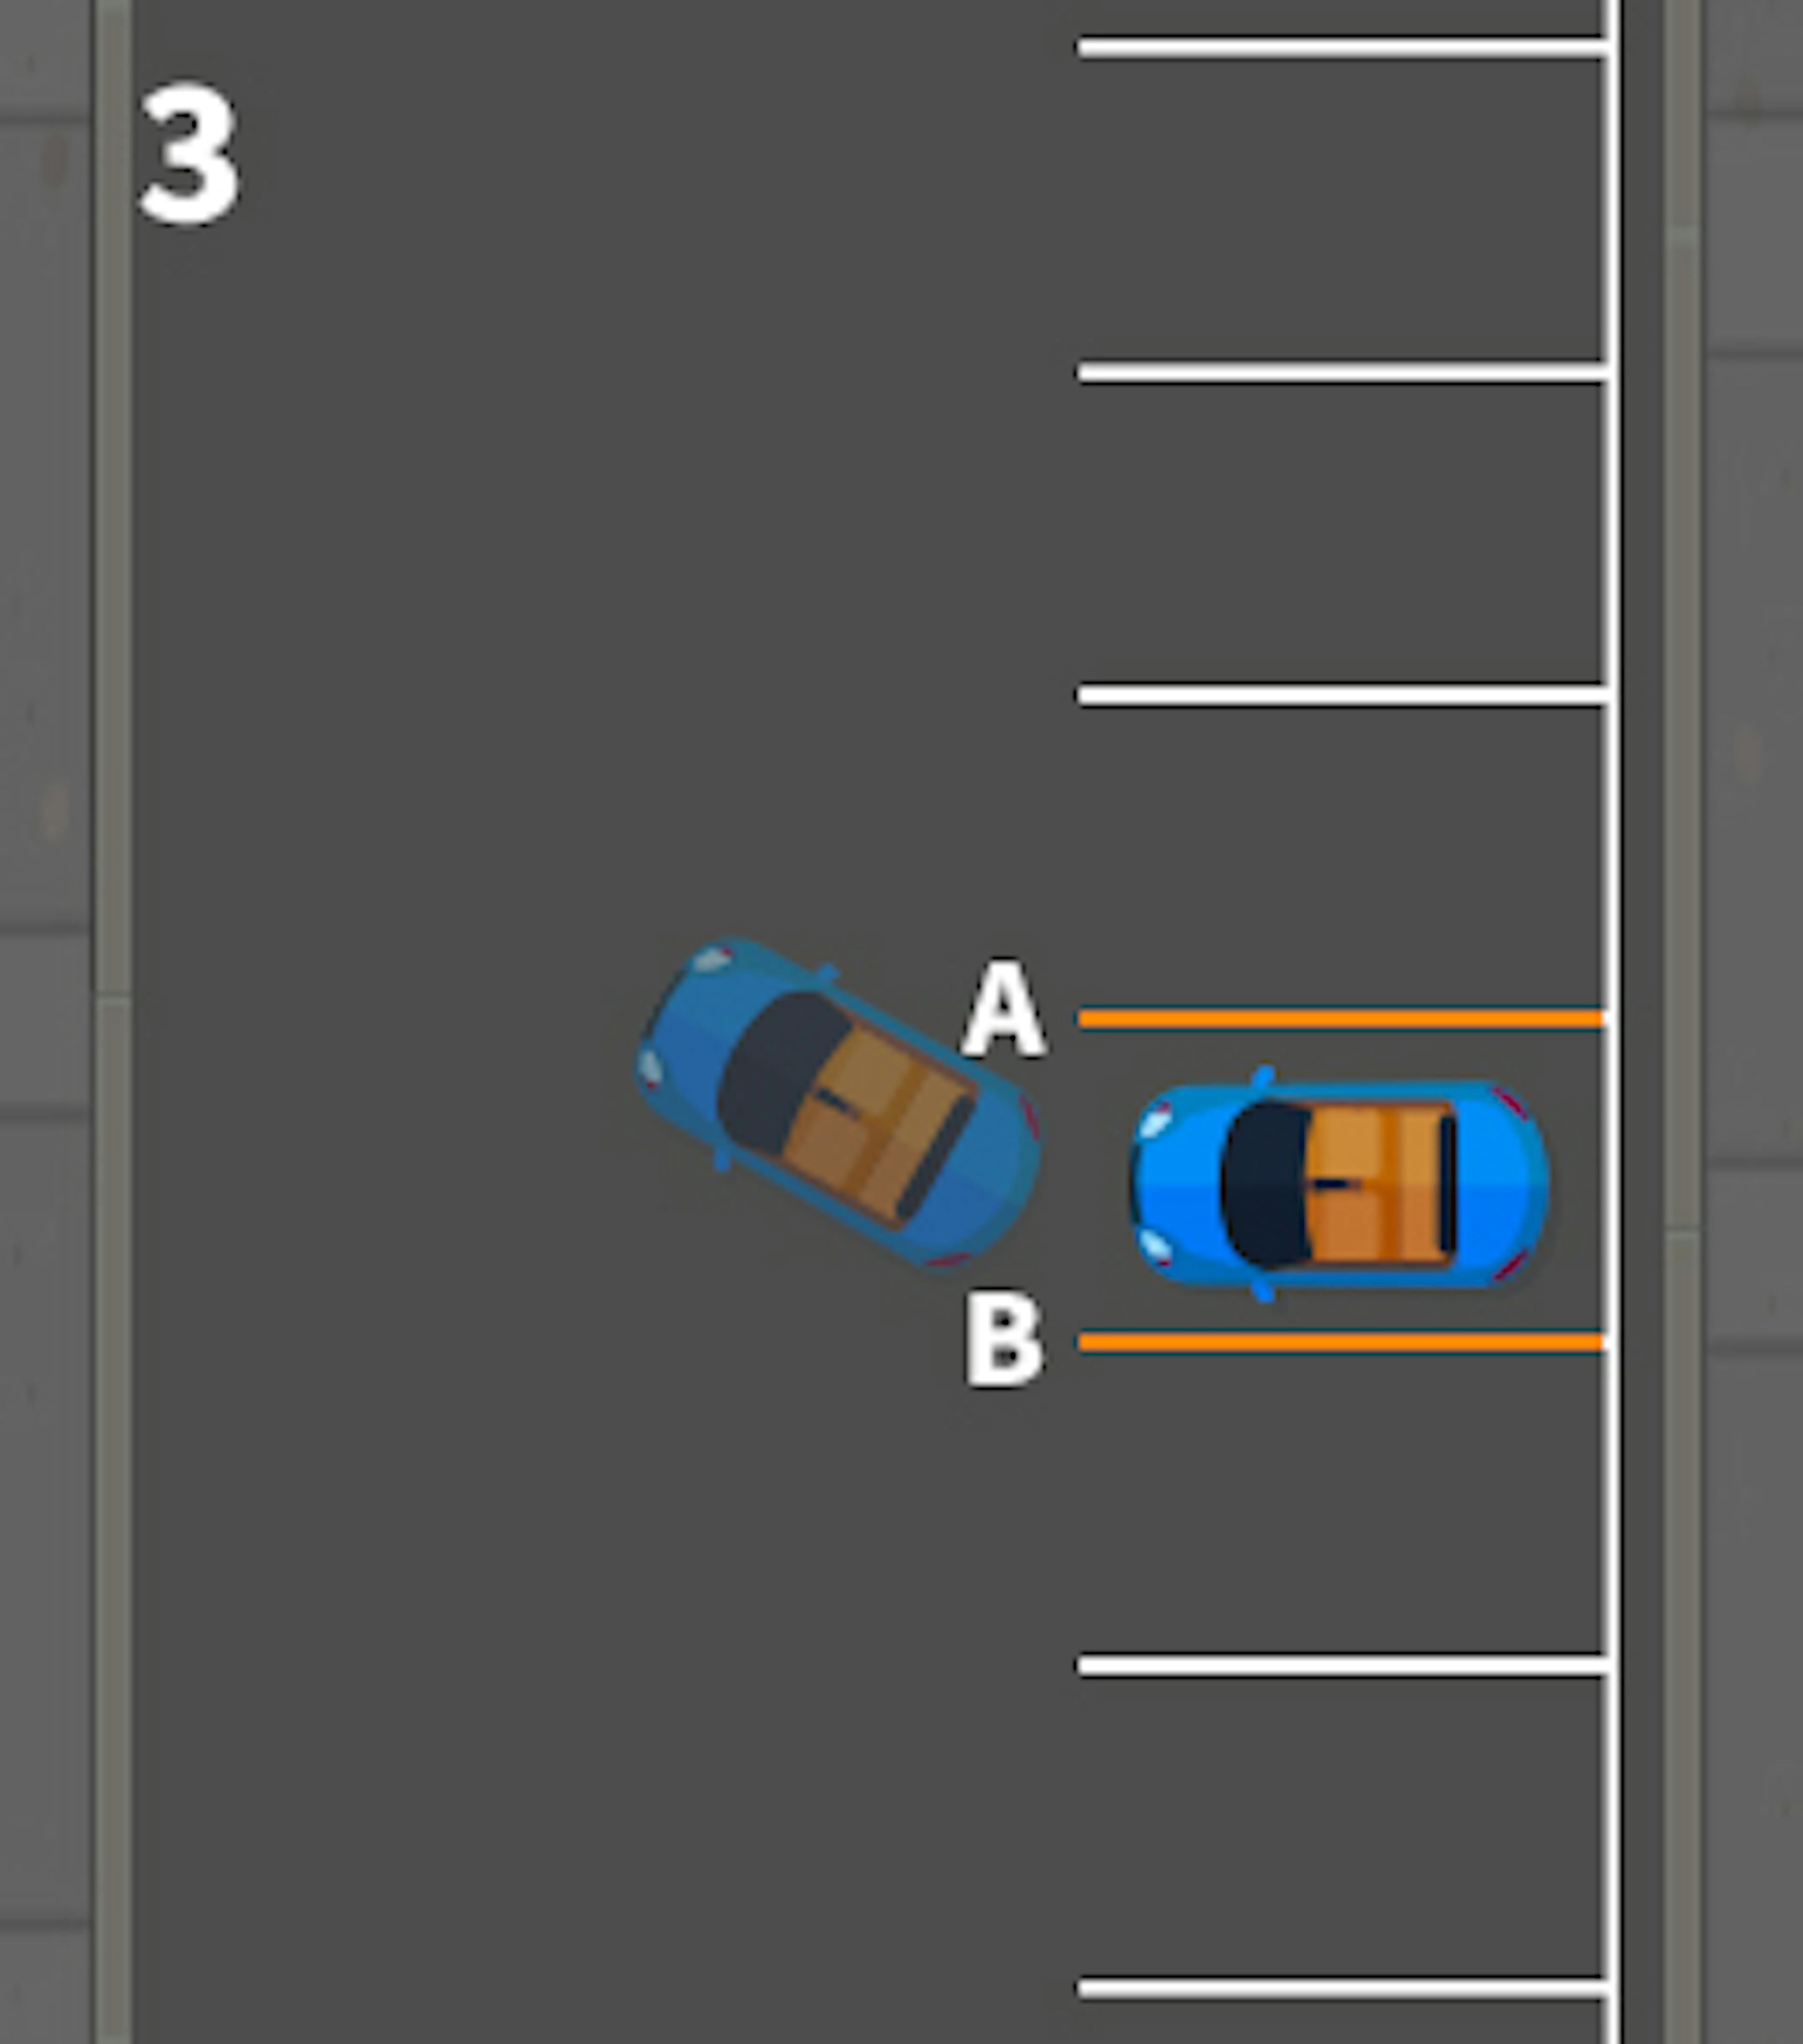 graphic illustrating how to perform a reverse bay park